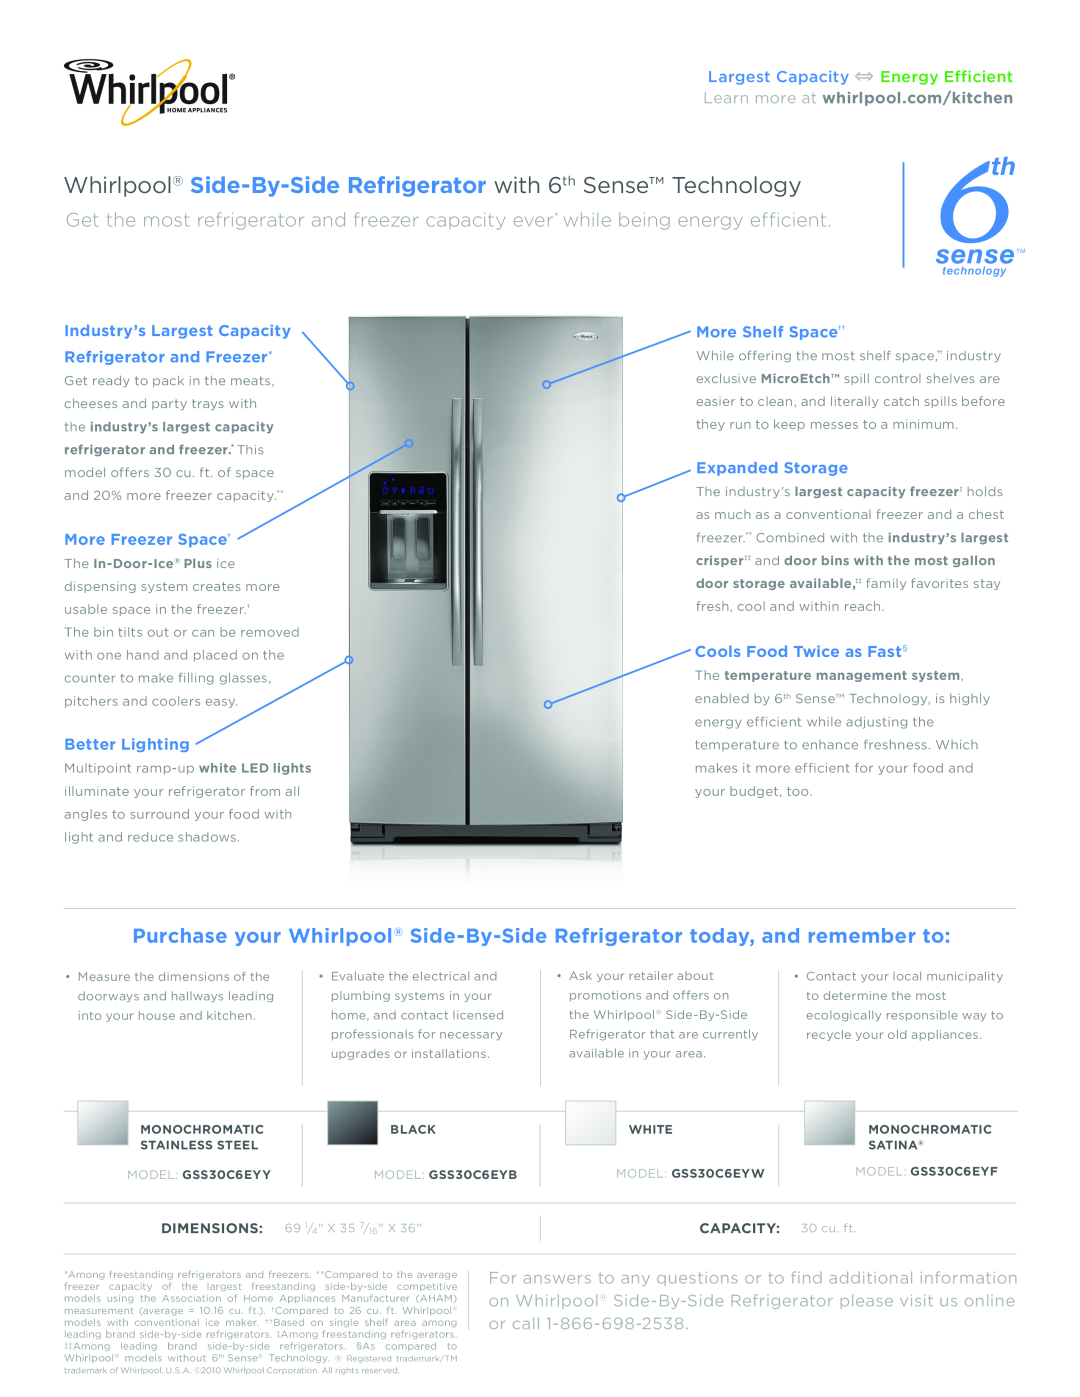 Whirlpool GSS30C6EYW dimensions Whirlpool Side-By-Side Refrigerator with 6th Sense Technology, More Freezer Space† 